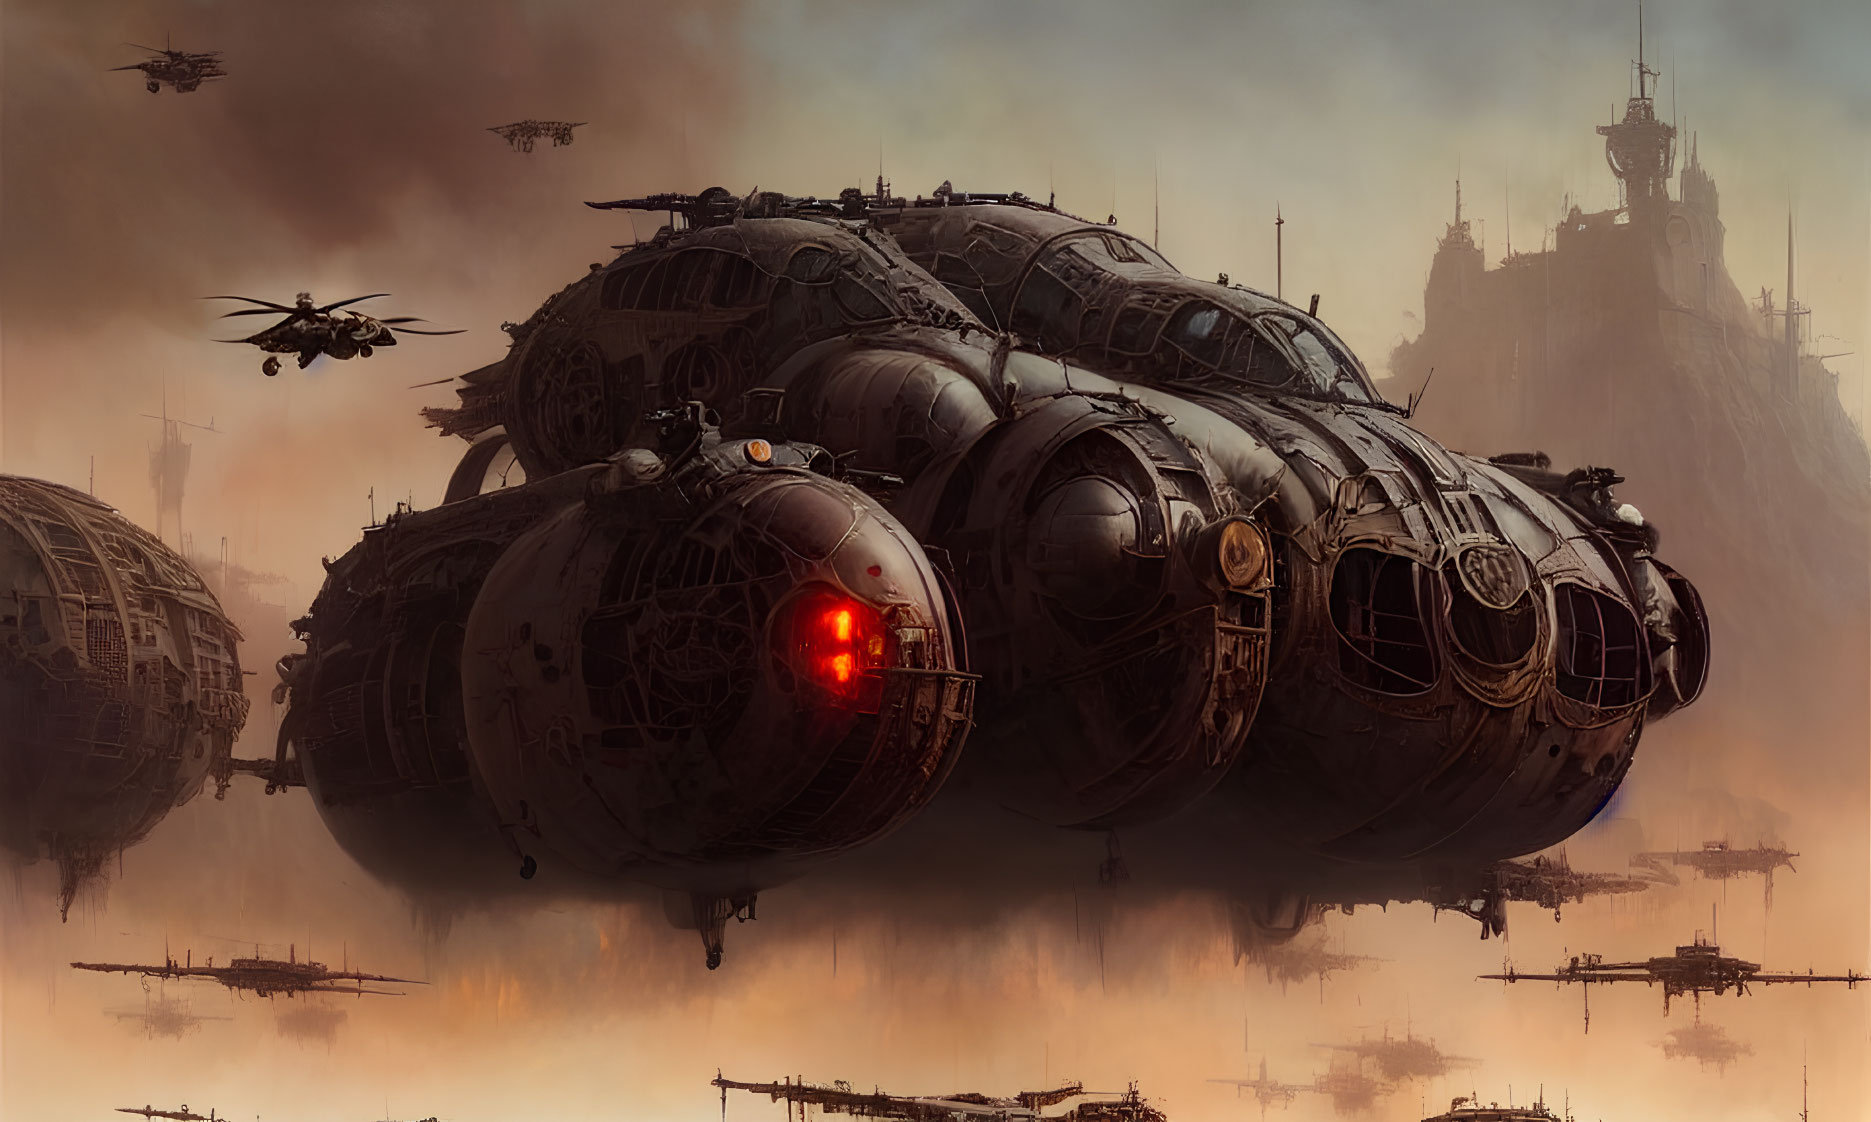 Dark Dystopian Landscape with Red Glowing Eye and Airships